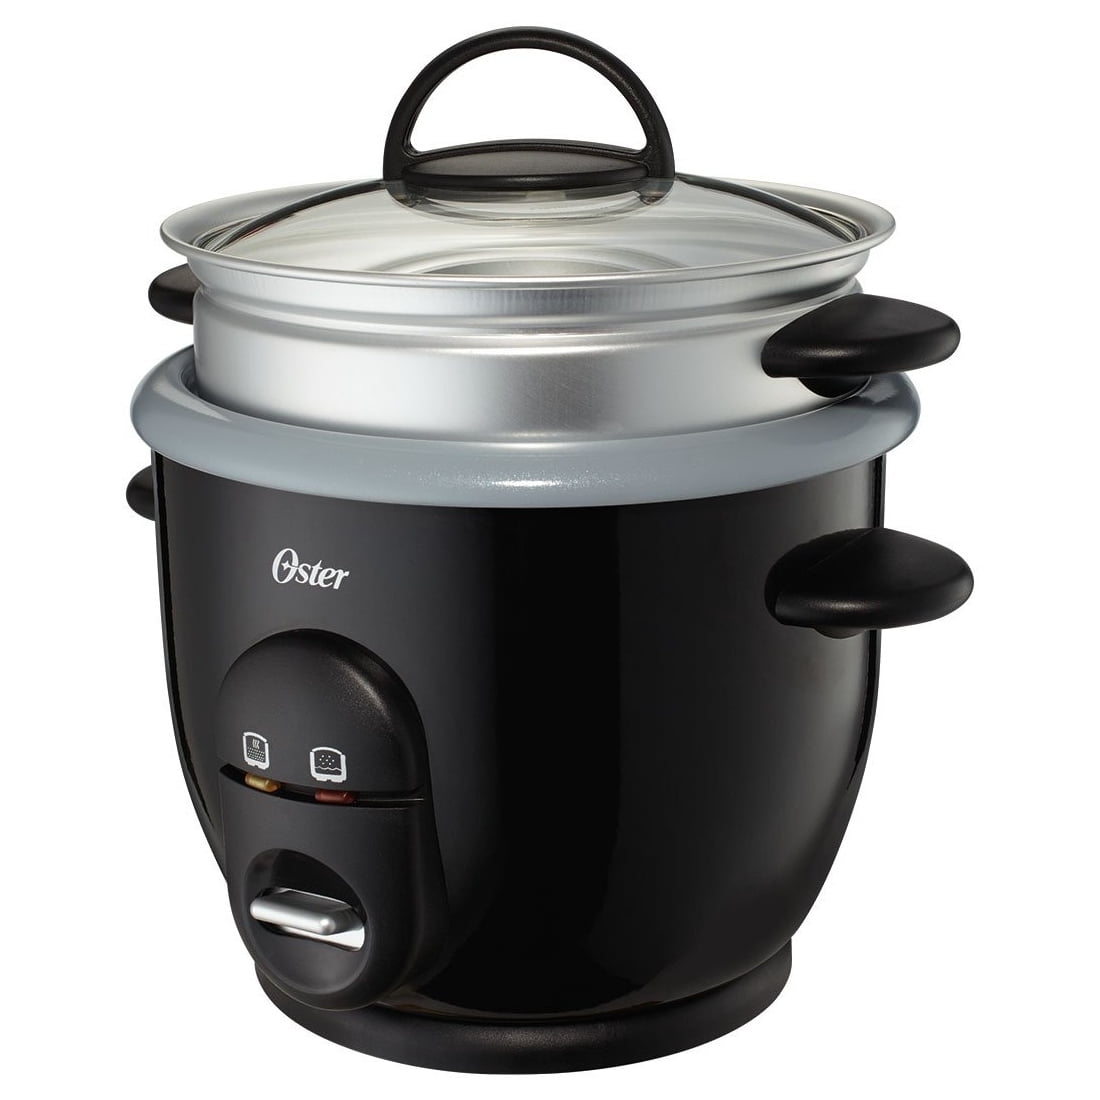 Roeder Sushi rice cooker, 00-00336